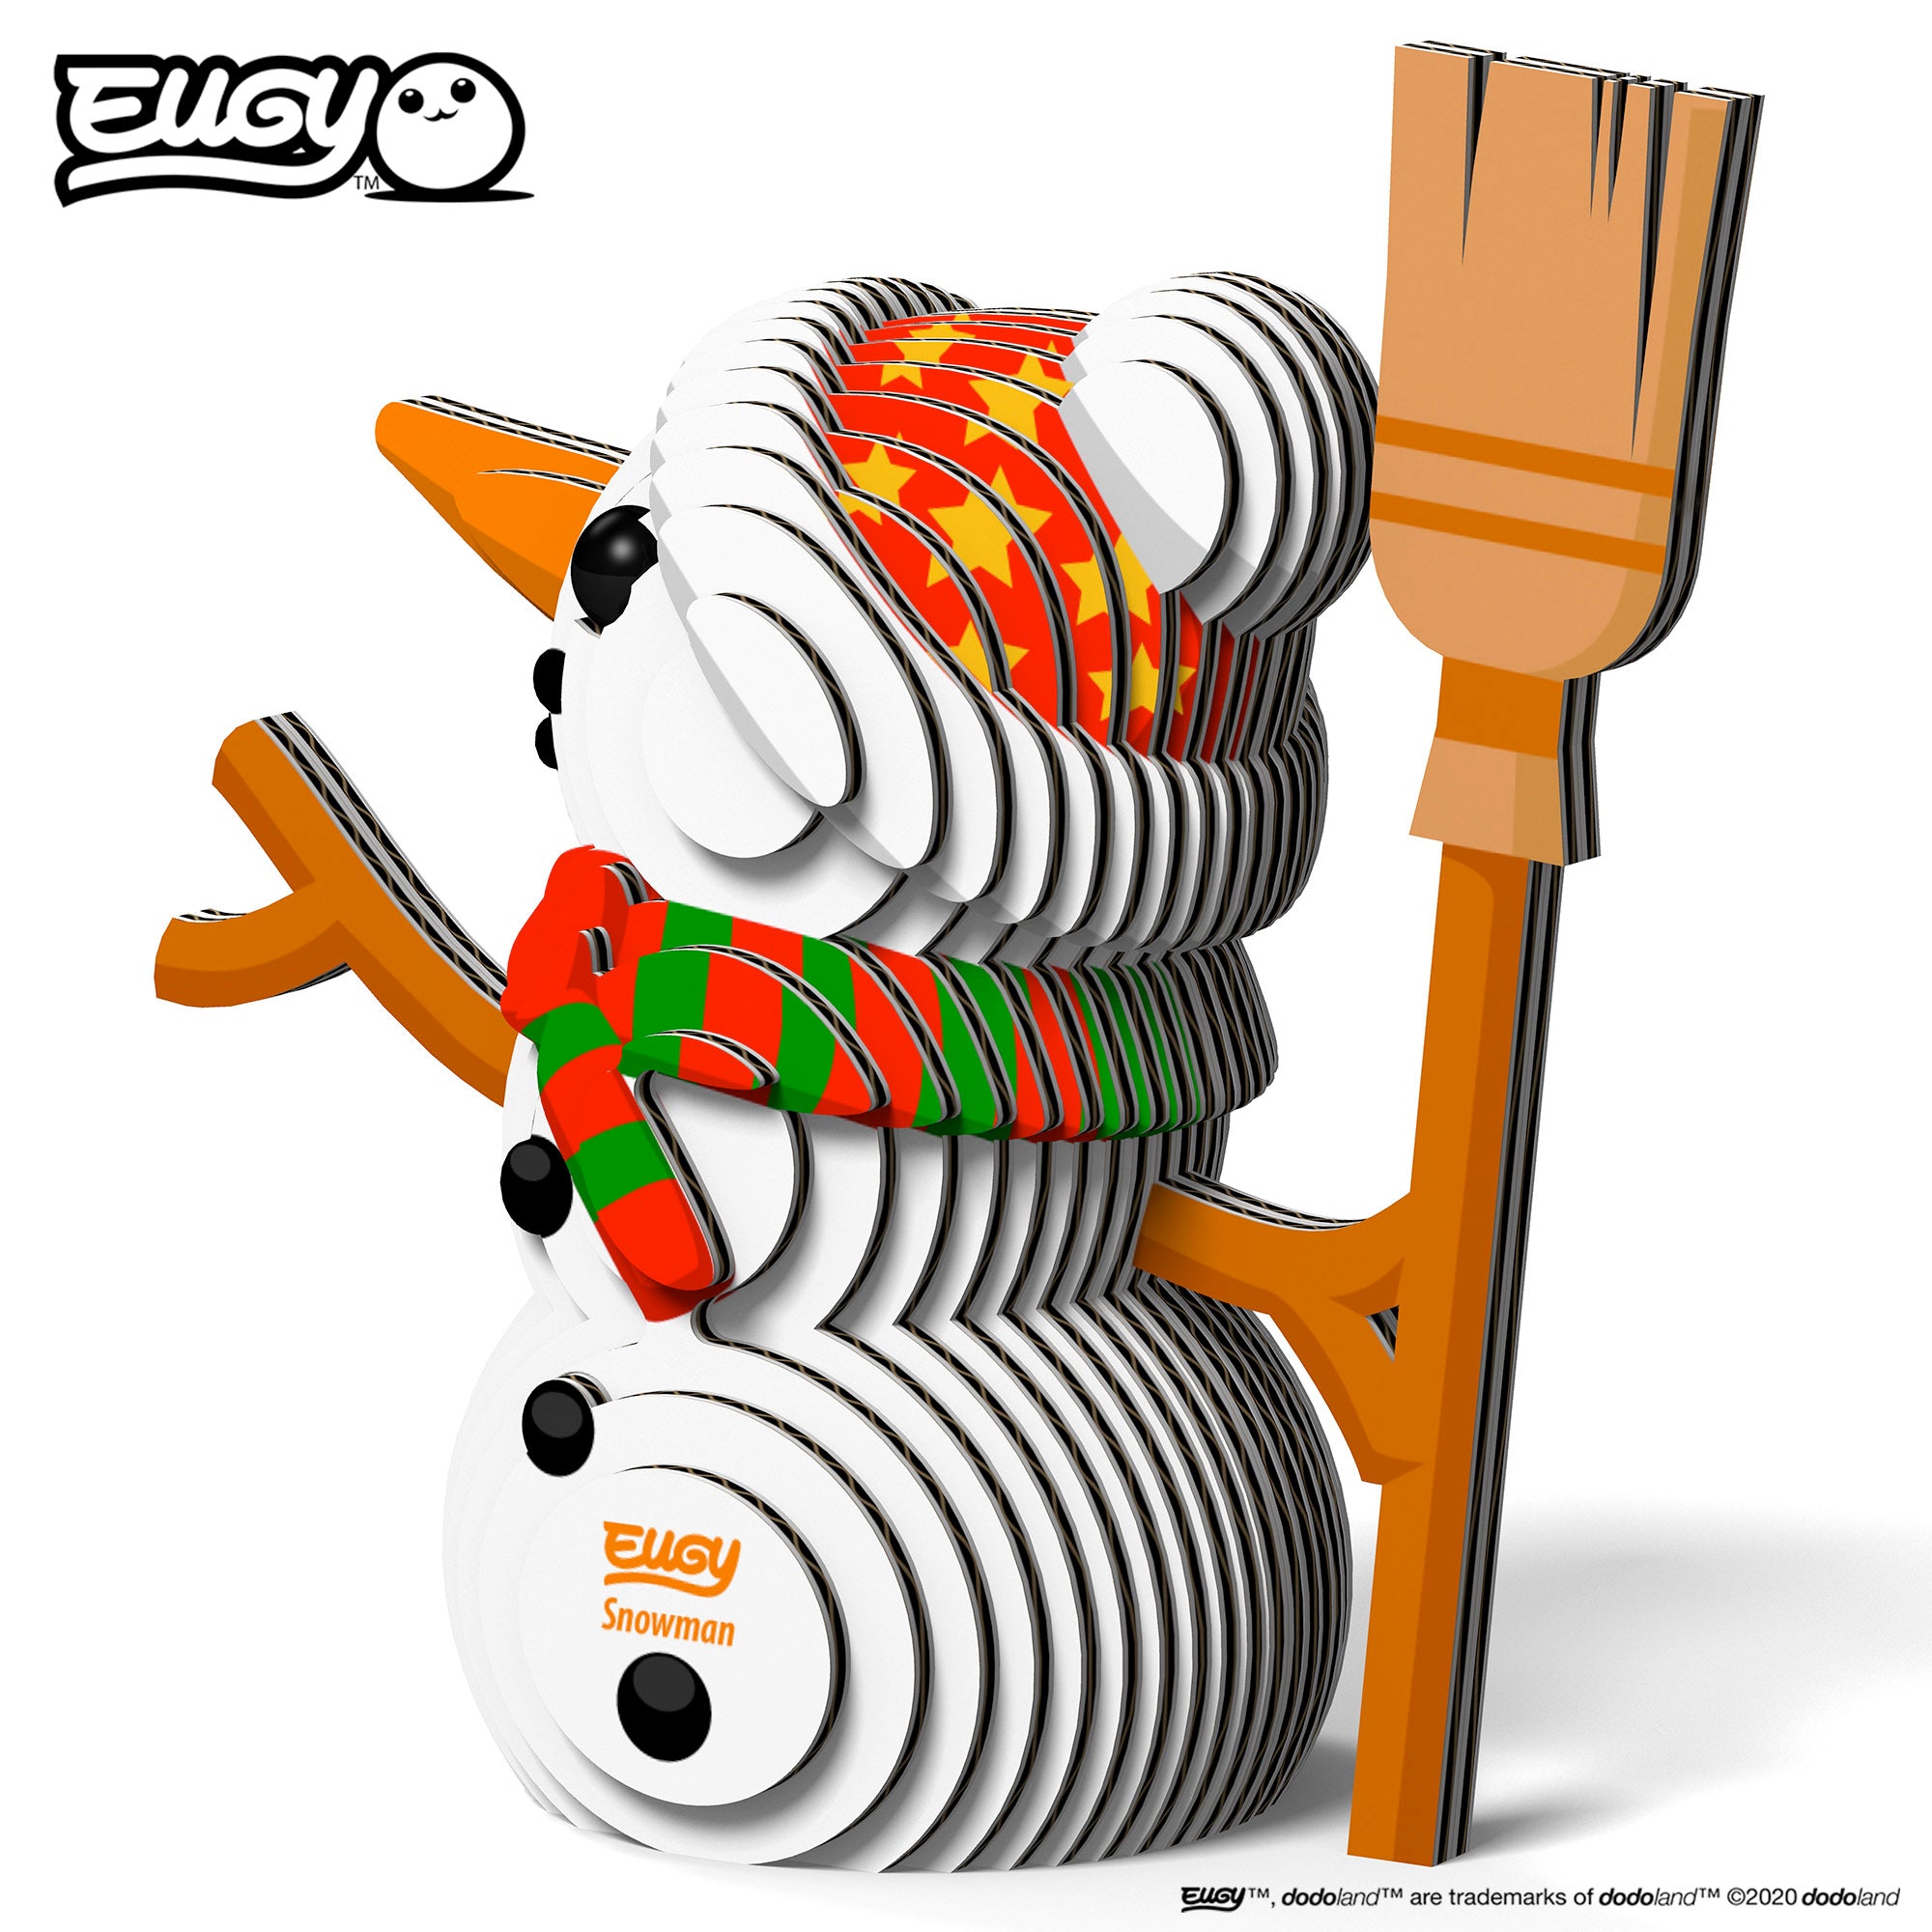 Image of an EUGY Snowman, facing left and viewed from the rear. Against a white background